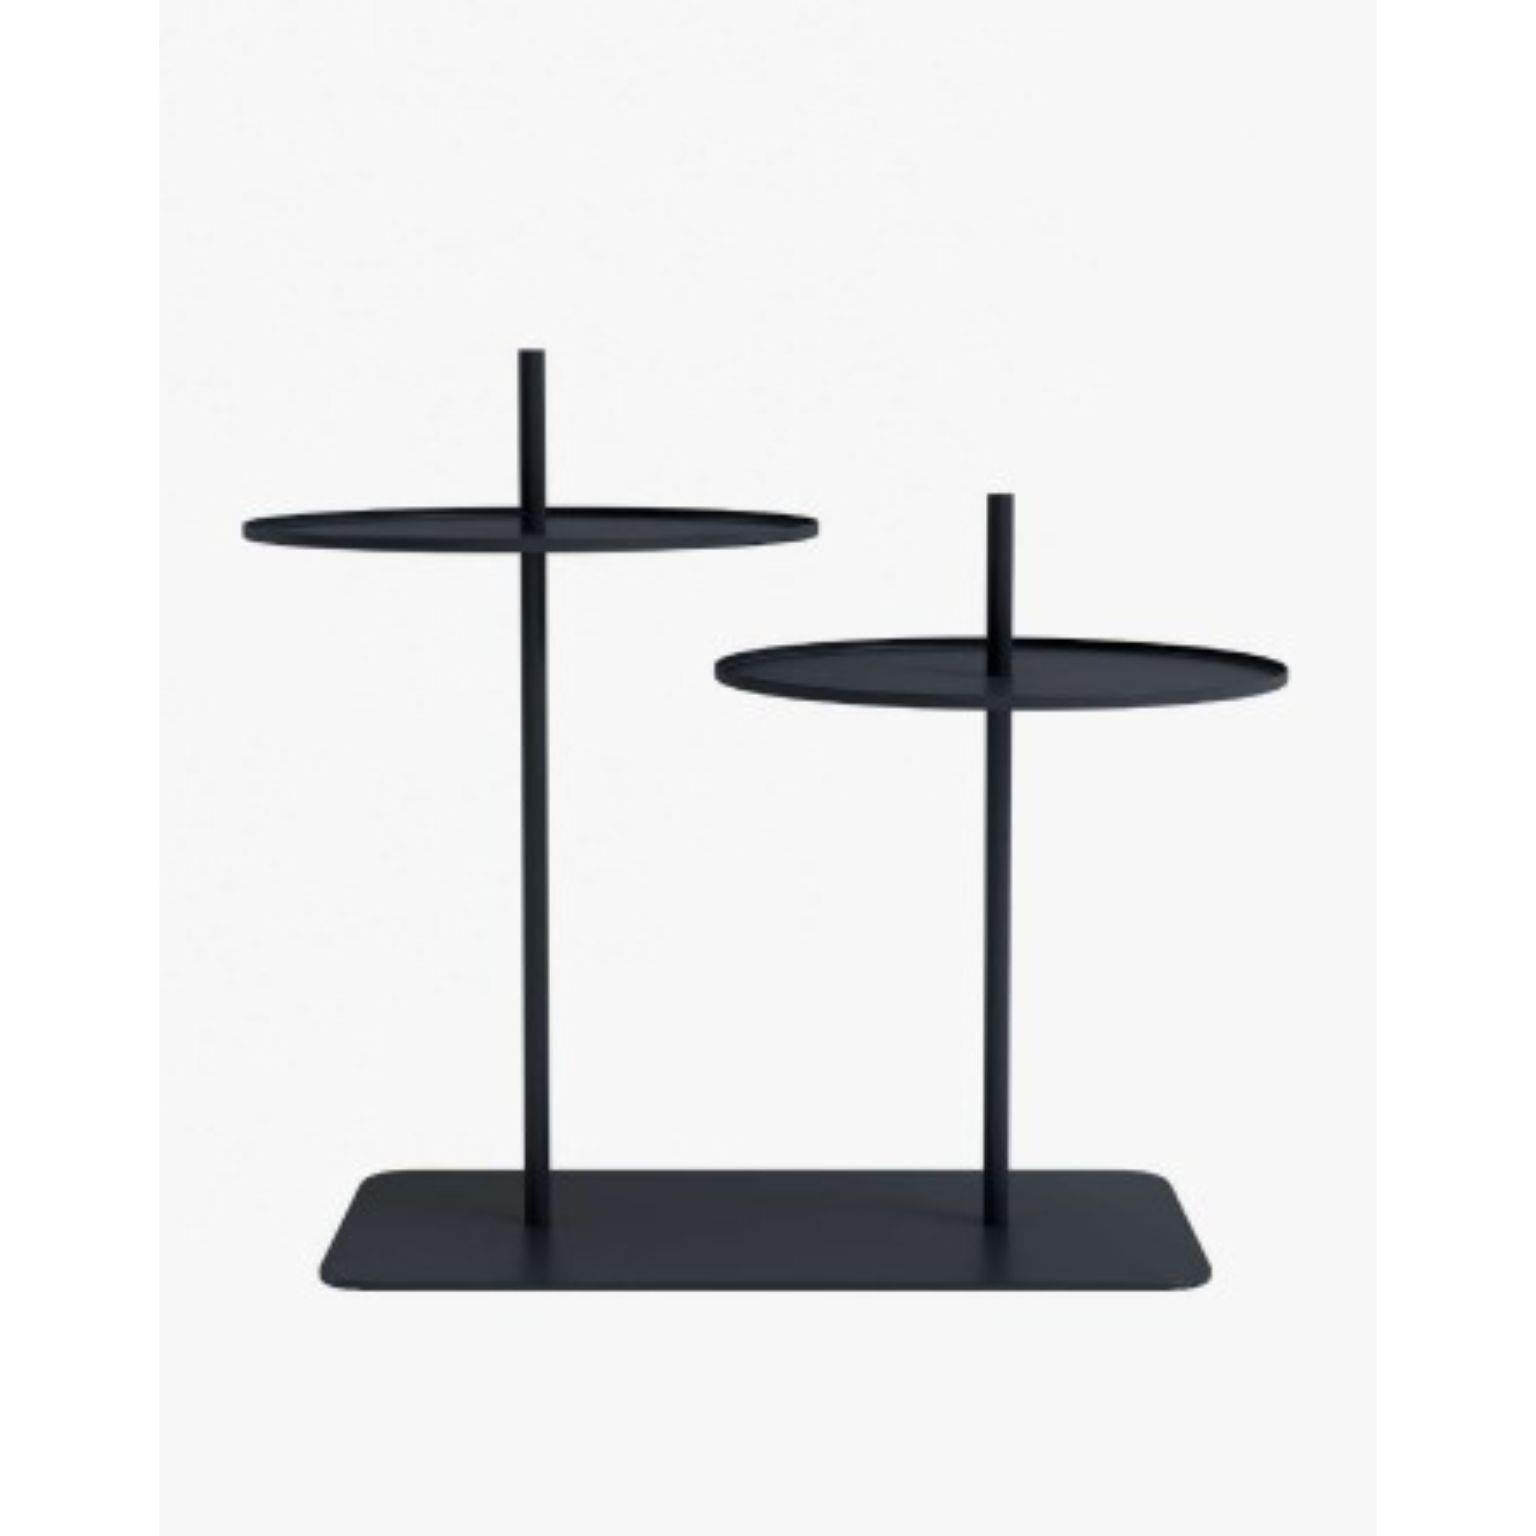 Spin 02 Black Coffee Table by Oito
Dimensions: D41x W73 x H75 cm
Materials: Powder coated steel
Weight: 10 kg
Also Available in different colours.
Suitable for outdoor use.
Assembly design. Registered design.

The idea of a coffee table Spin